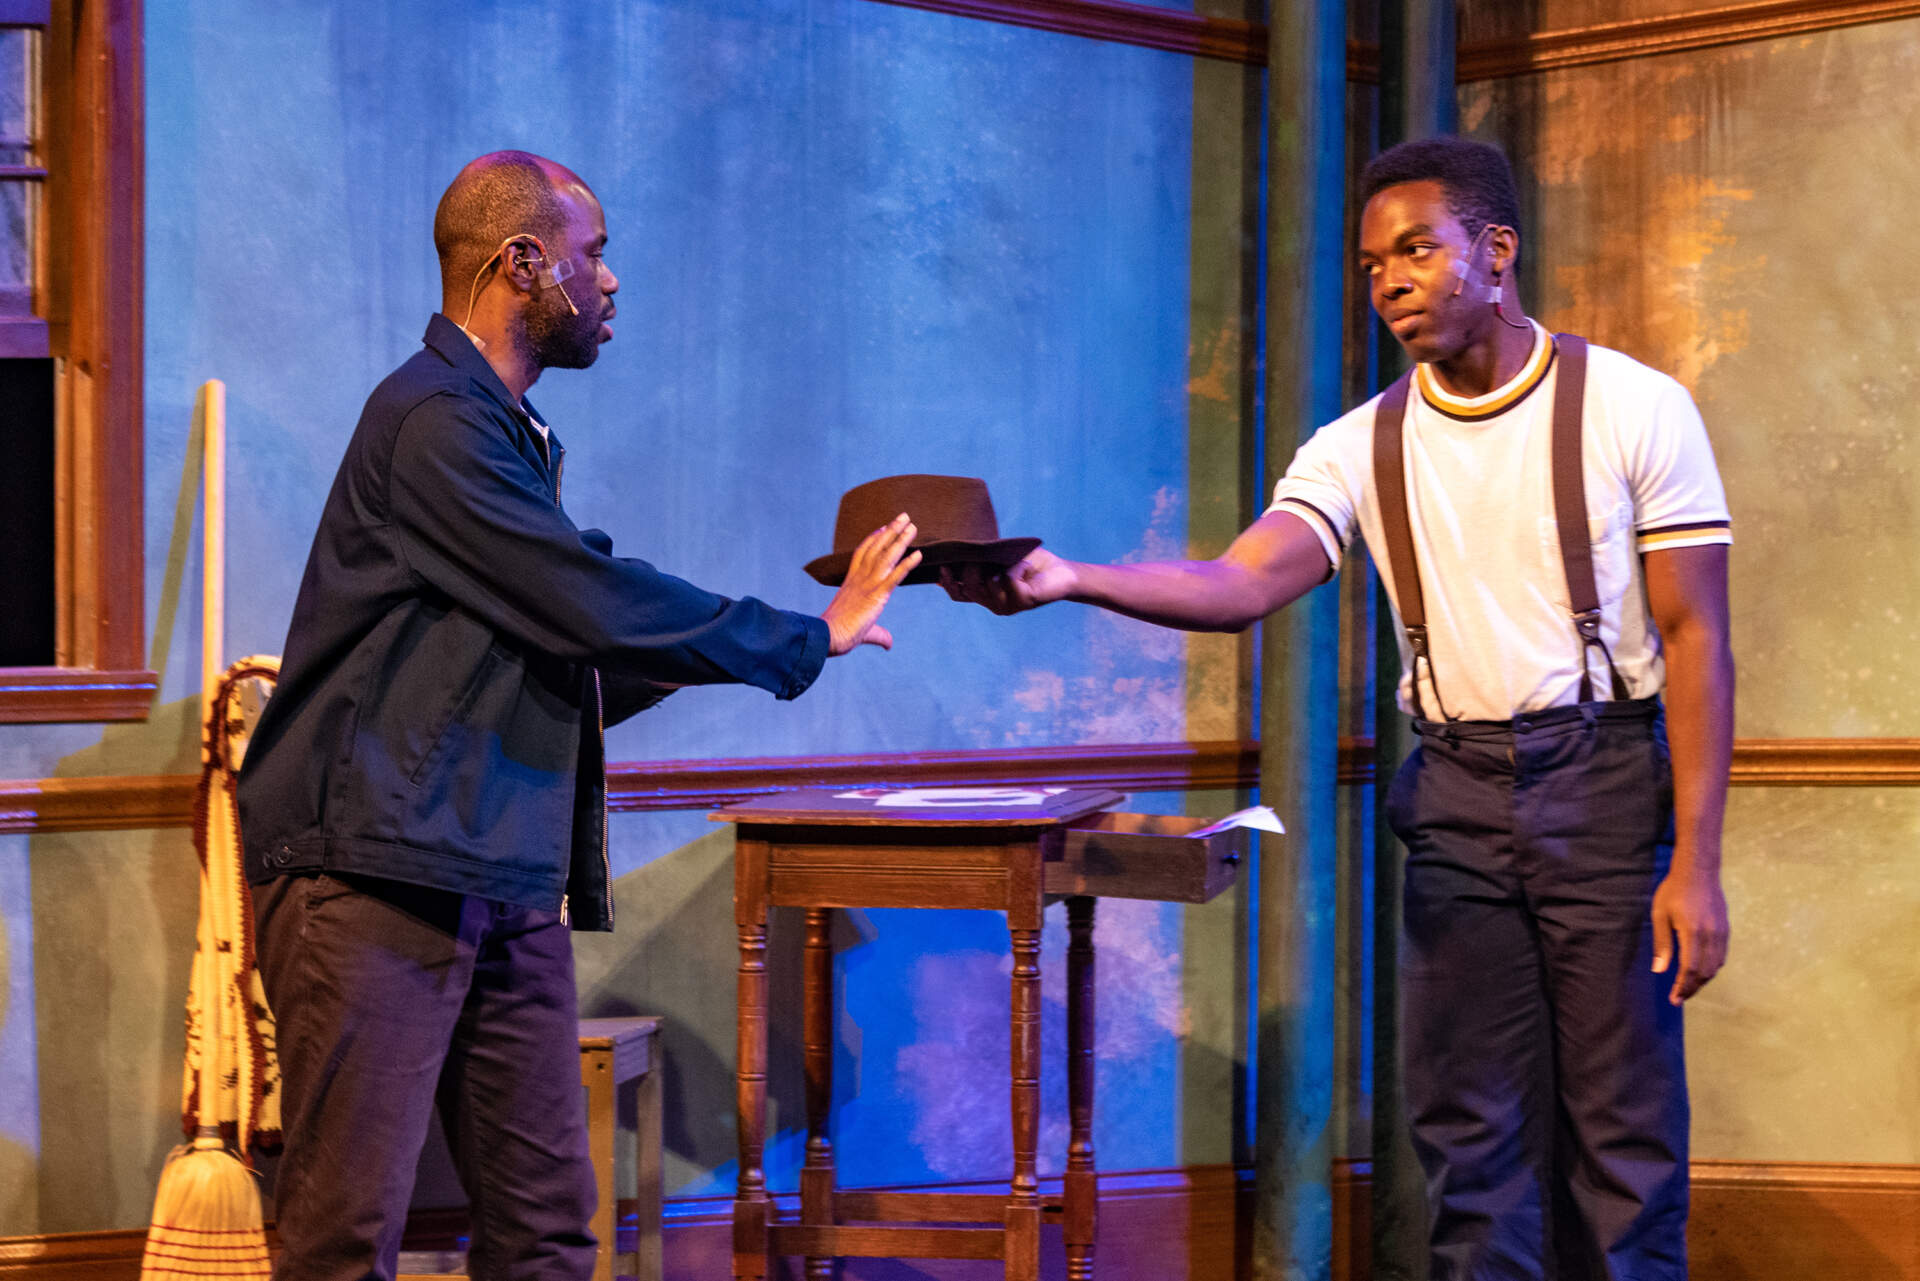 Cedric Lilly, as Mel, and Errol Service Jr., as The Boy, perform during a dress rehearsal of “The Boy Who Kissed the Sky” at the Strand Theatre. (Jesse Costa/WBUR)